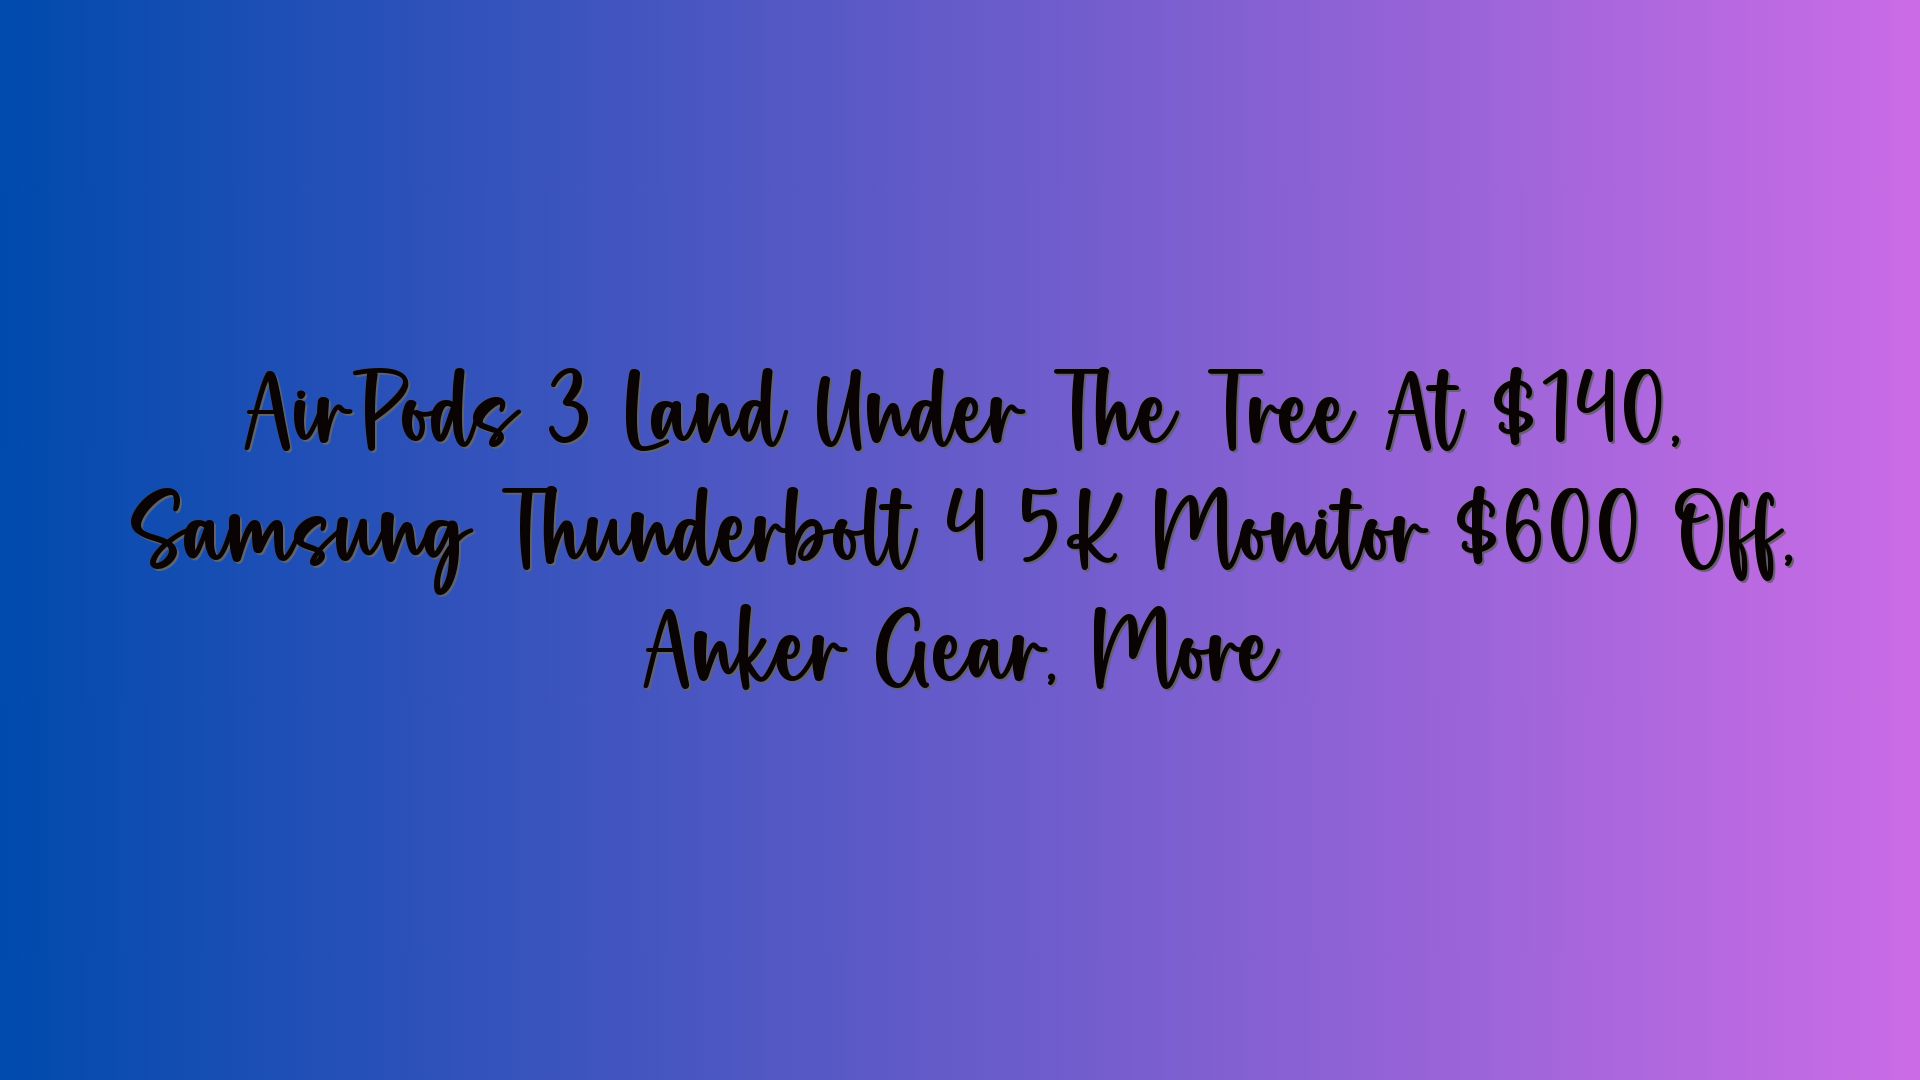 AirPods 3 Land Under The Tree At $140, Samsung Thunderbolt 4 5K Monitor $600 Off, Anker Gear, More